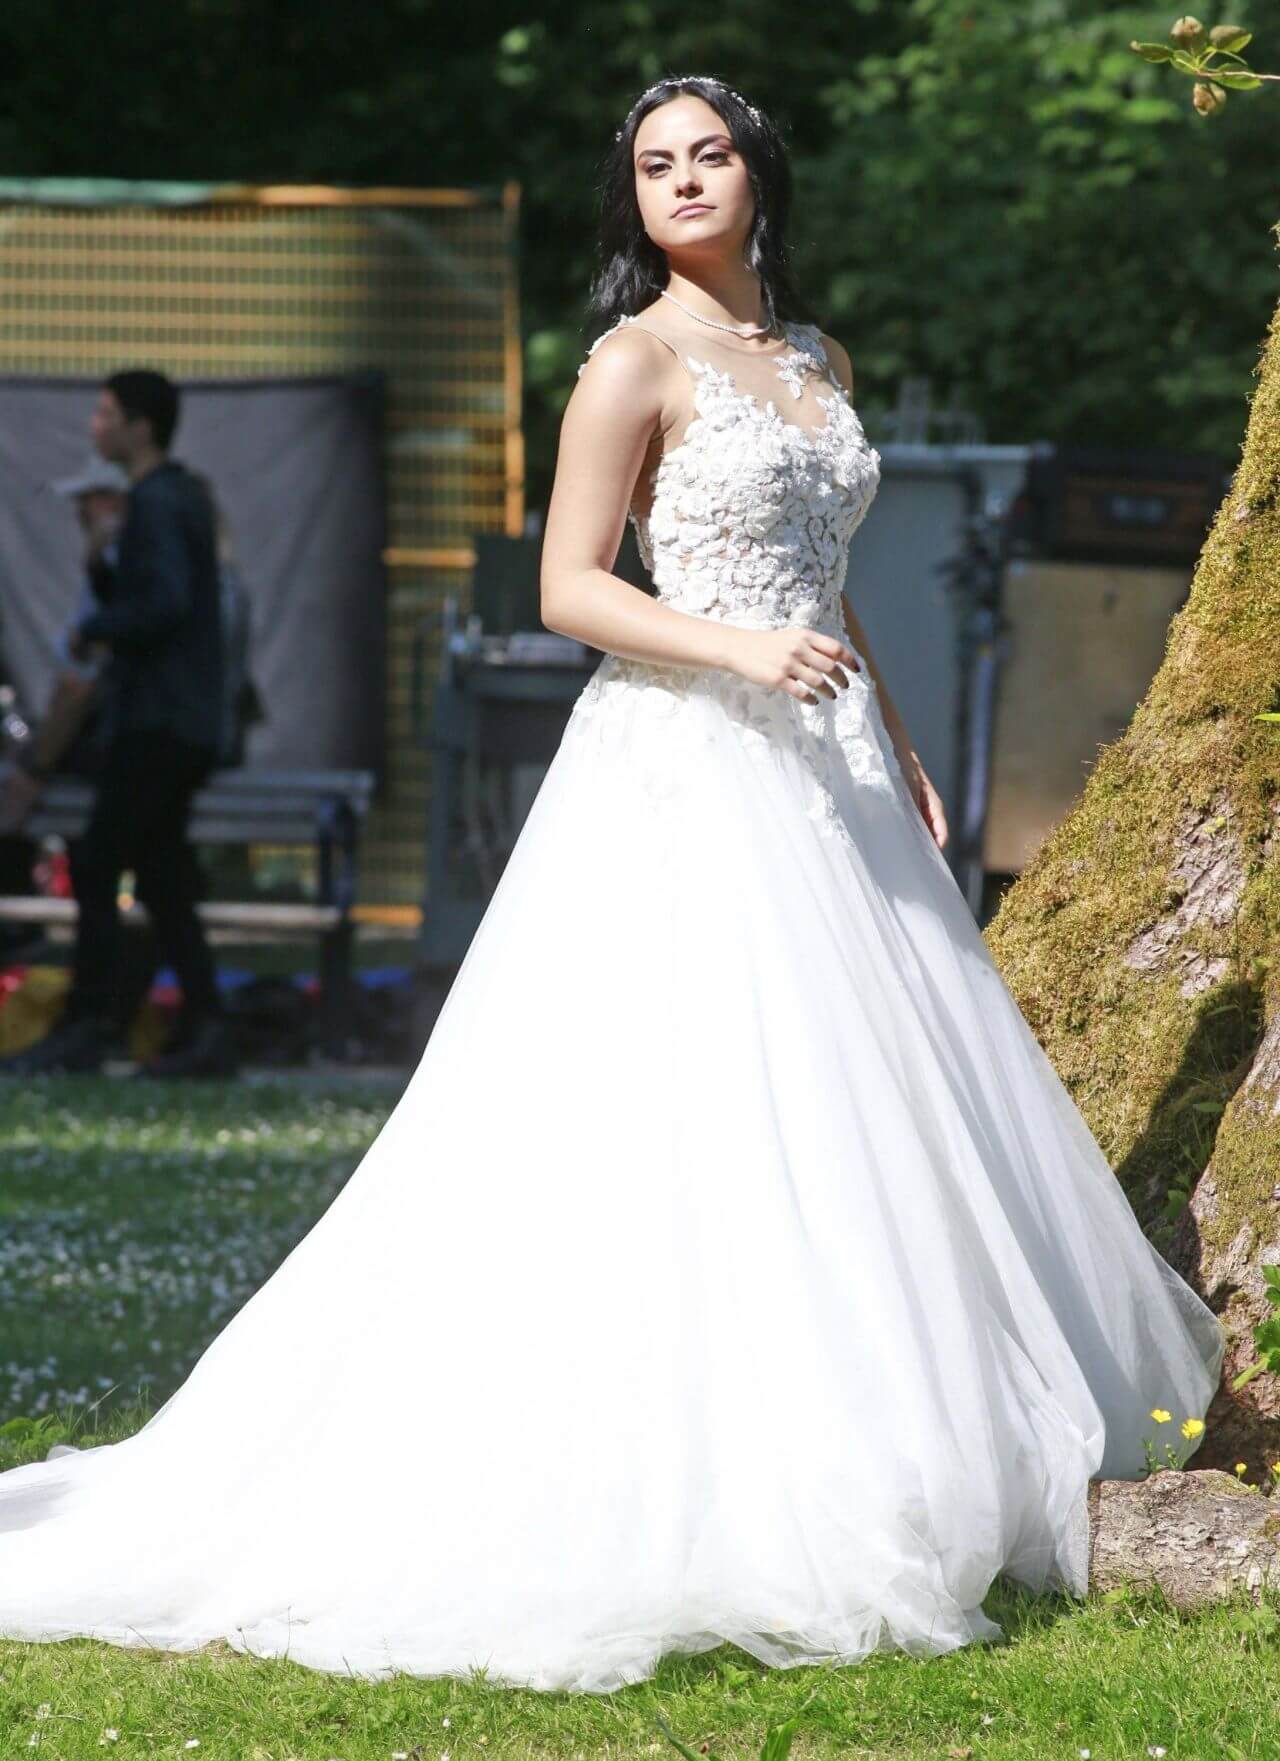 Camila Mendes  In White Wedding Gown At “Riverdale” Set at Barnet Marine Park in Vancouver